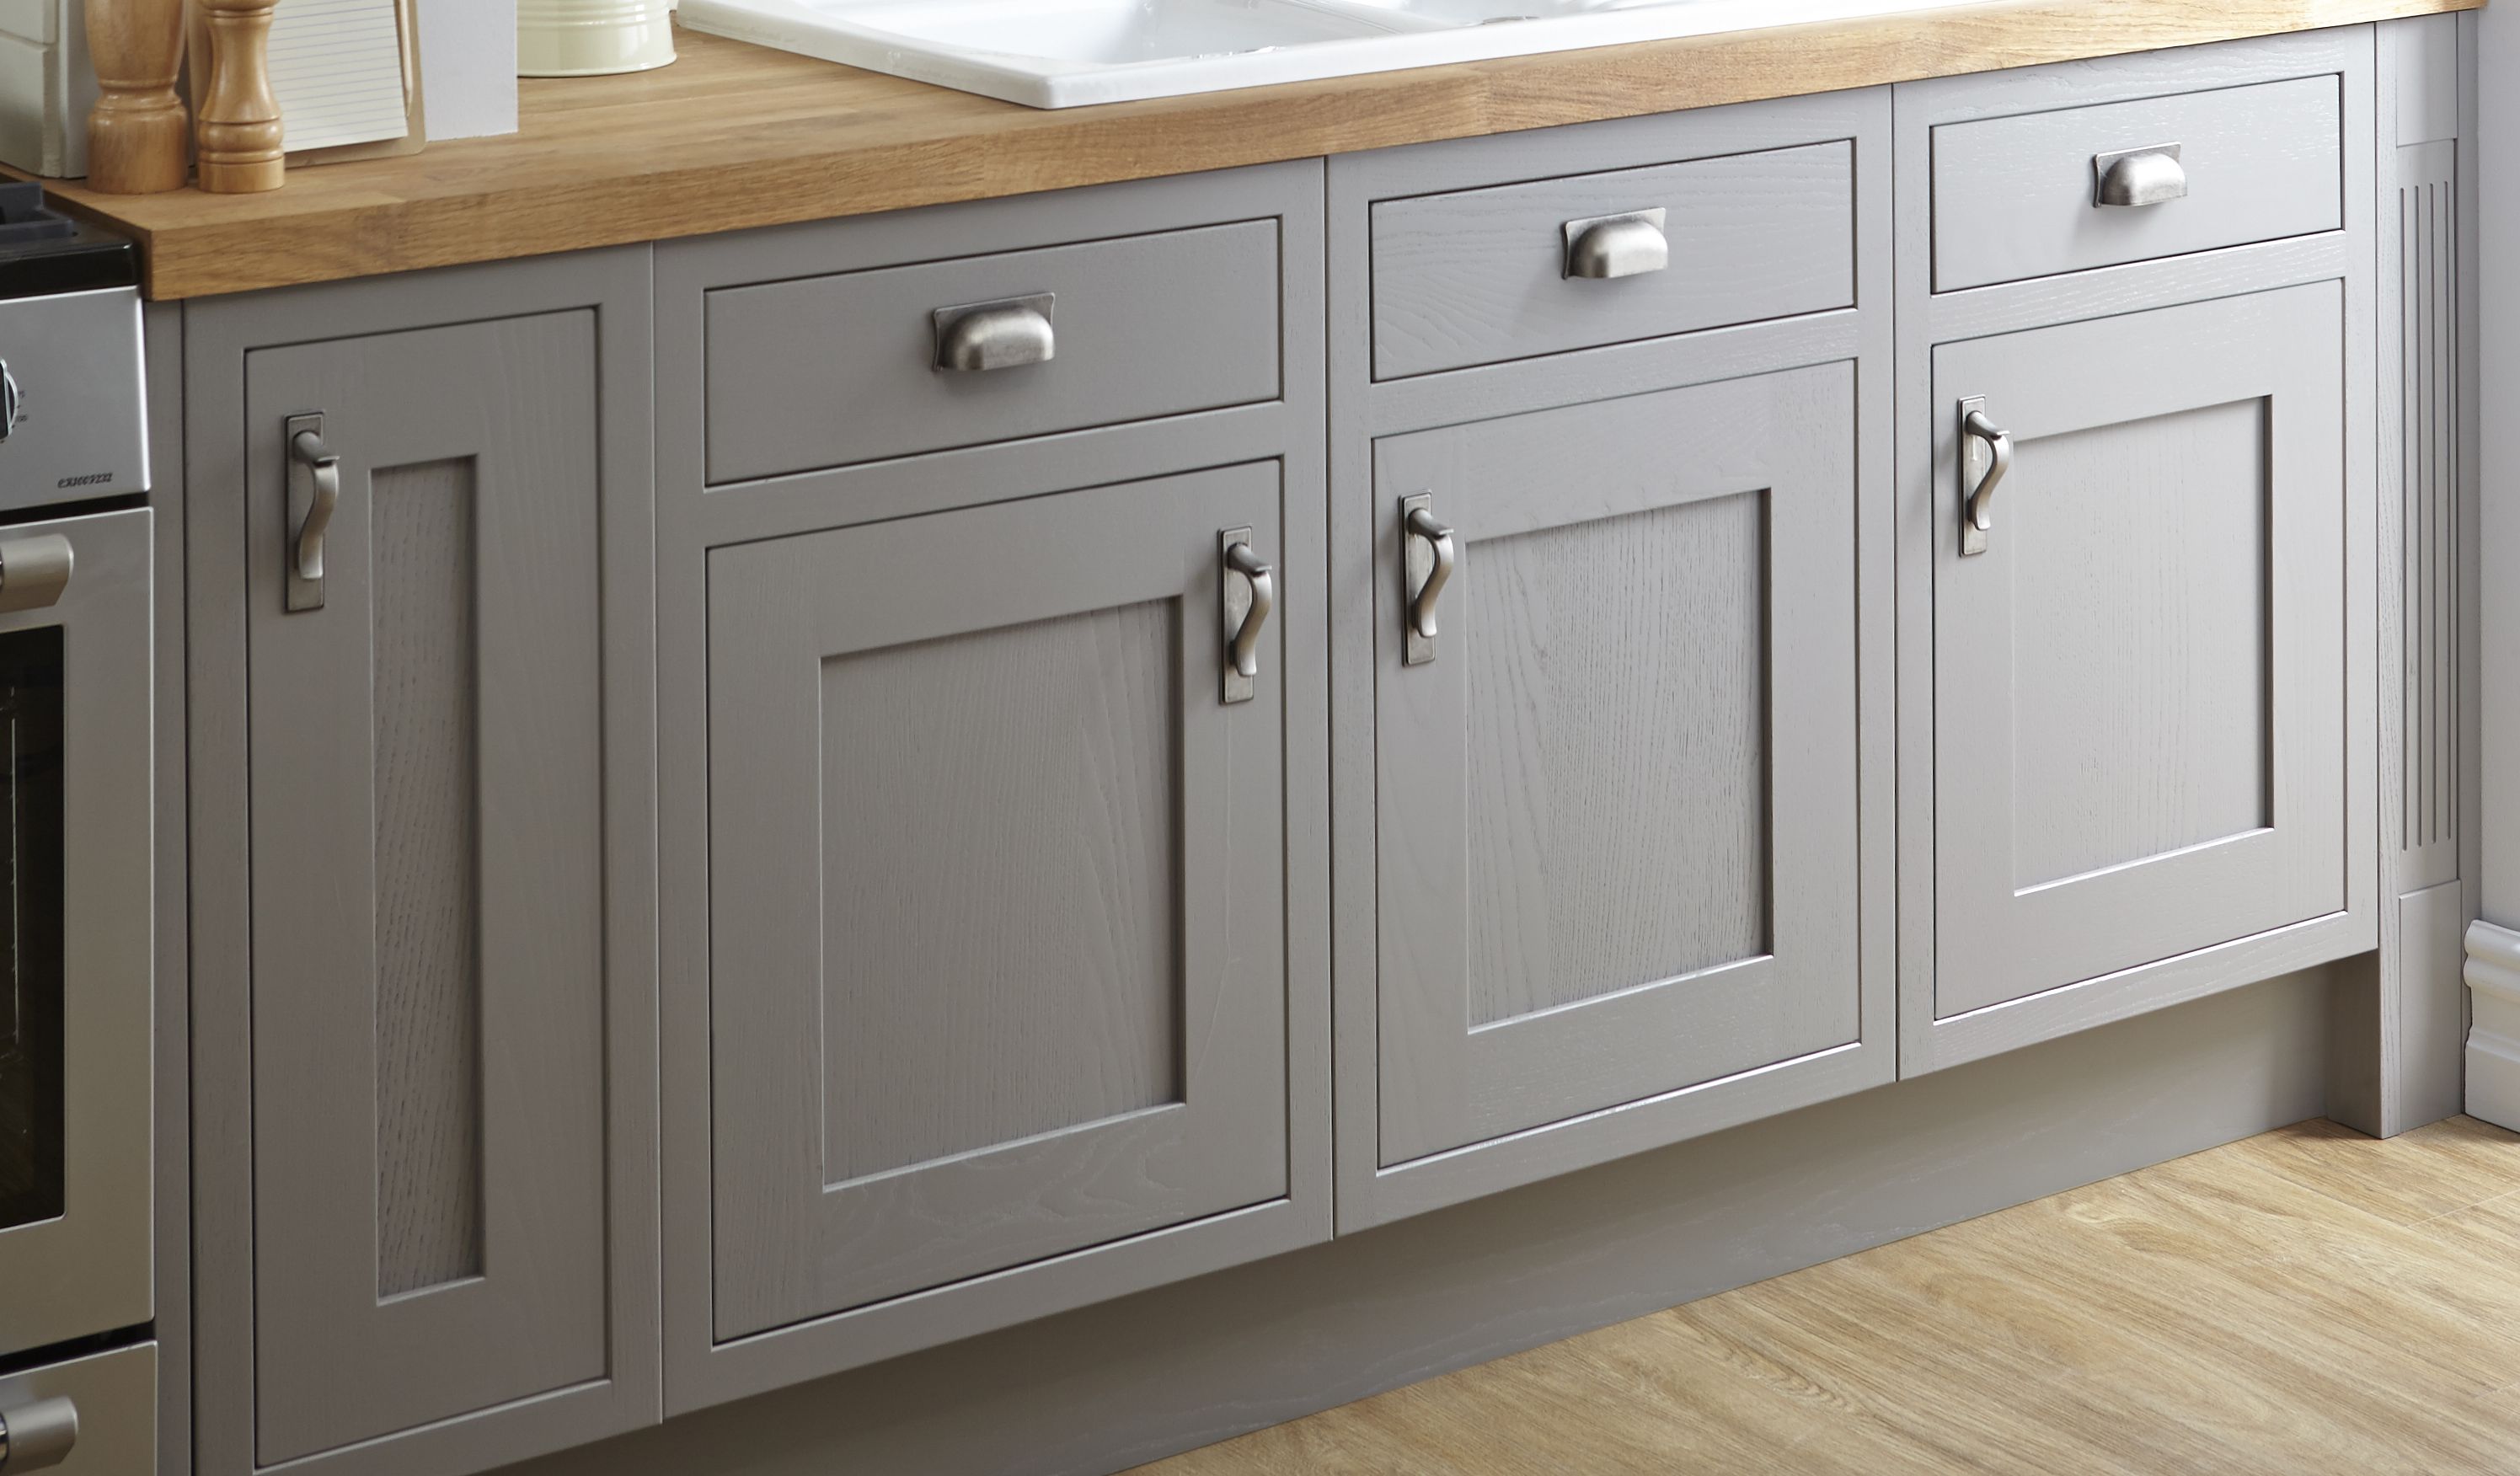 Buyer's guide to kitchen doors Help & Ideas DIY at B&Q